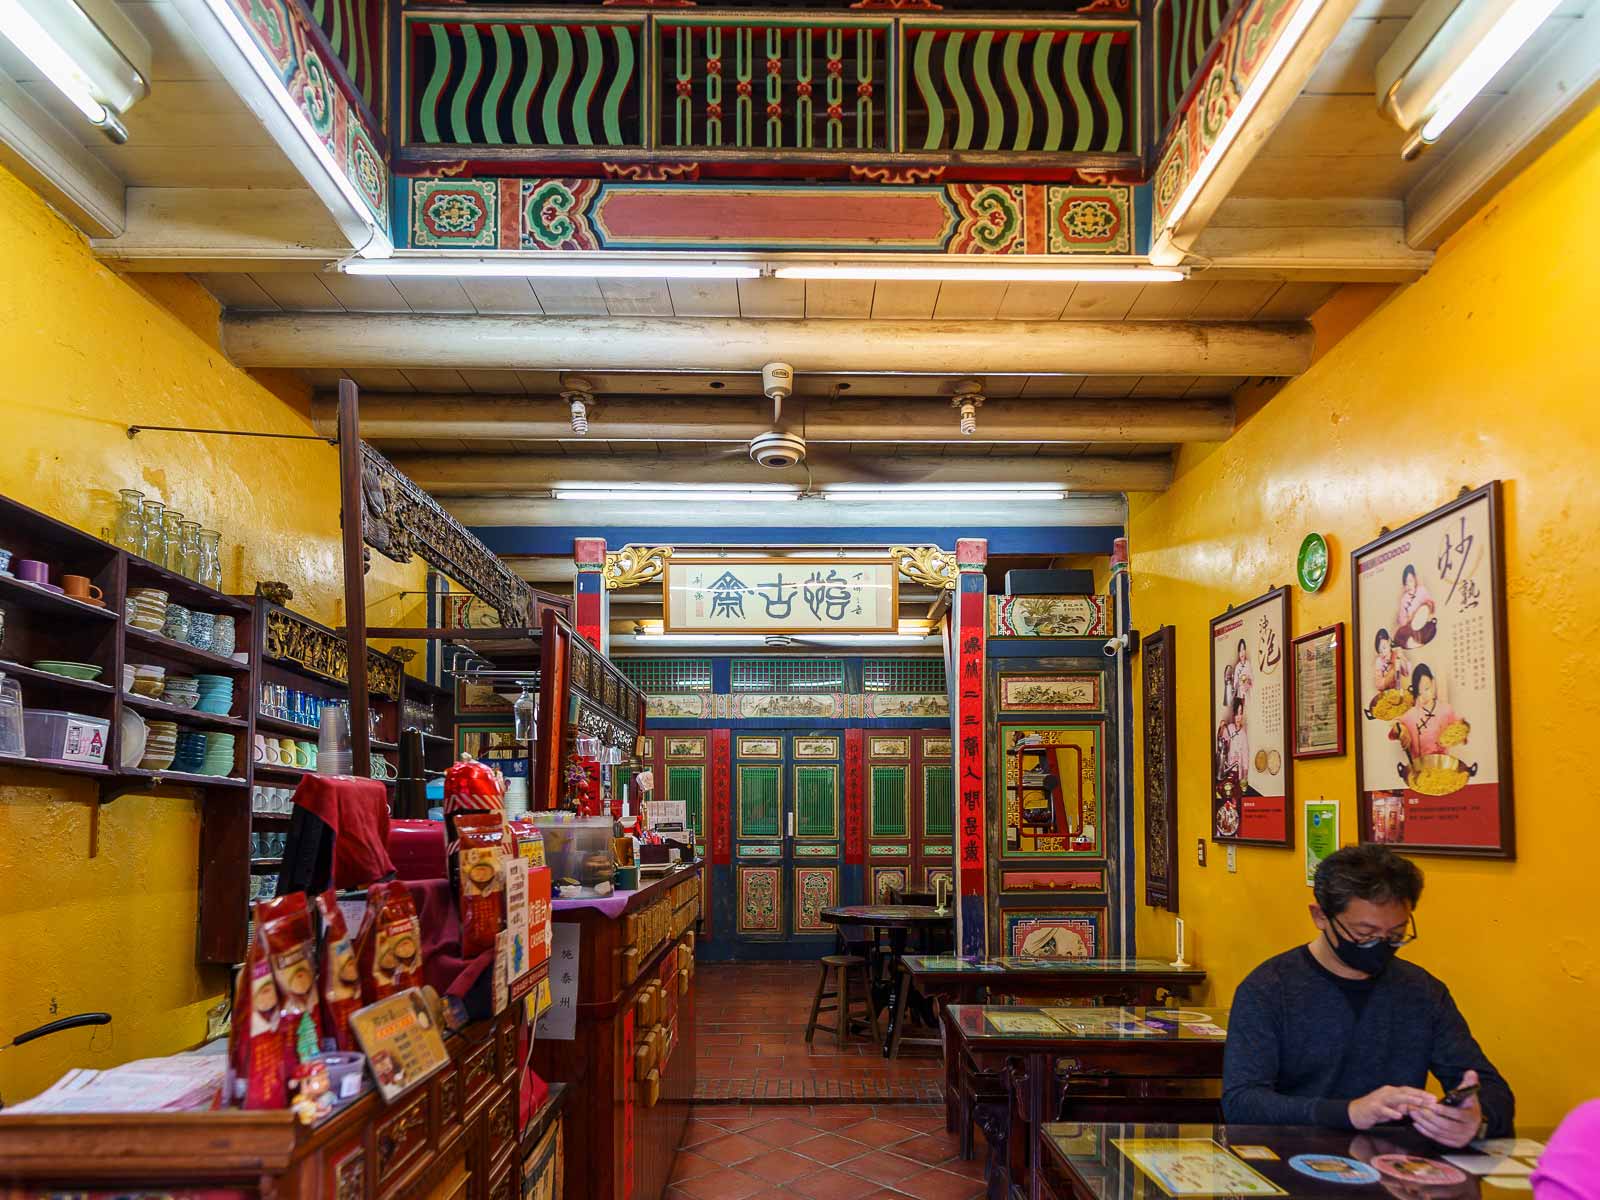 A cafe operates in a traditional house; the inside is long and narrow with colorful, elaborately painted details.